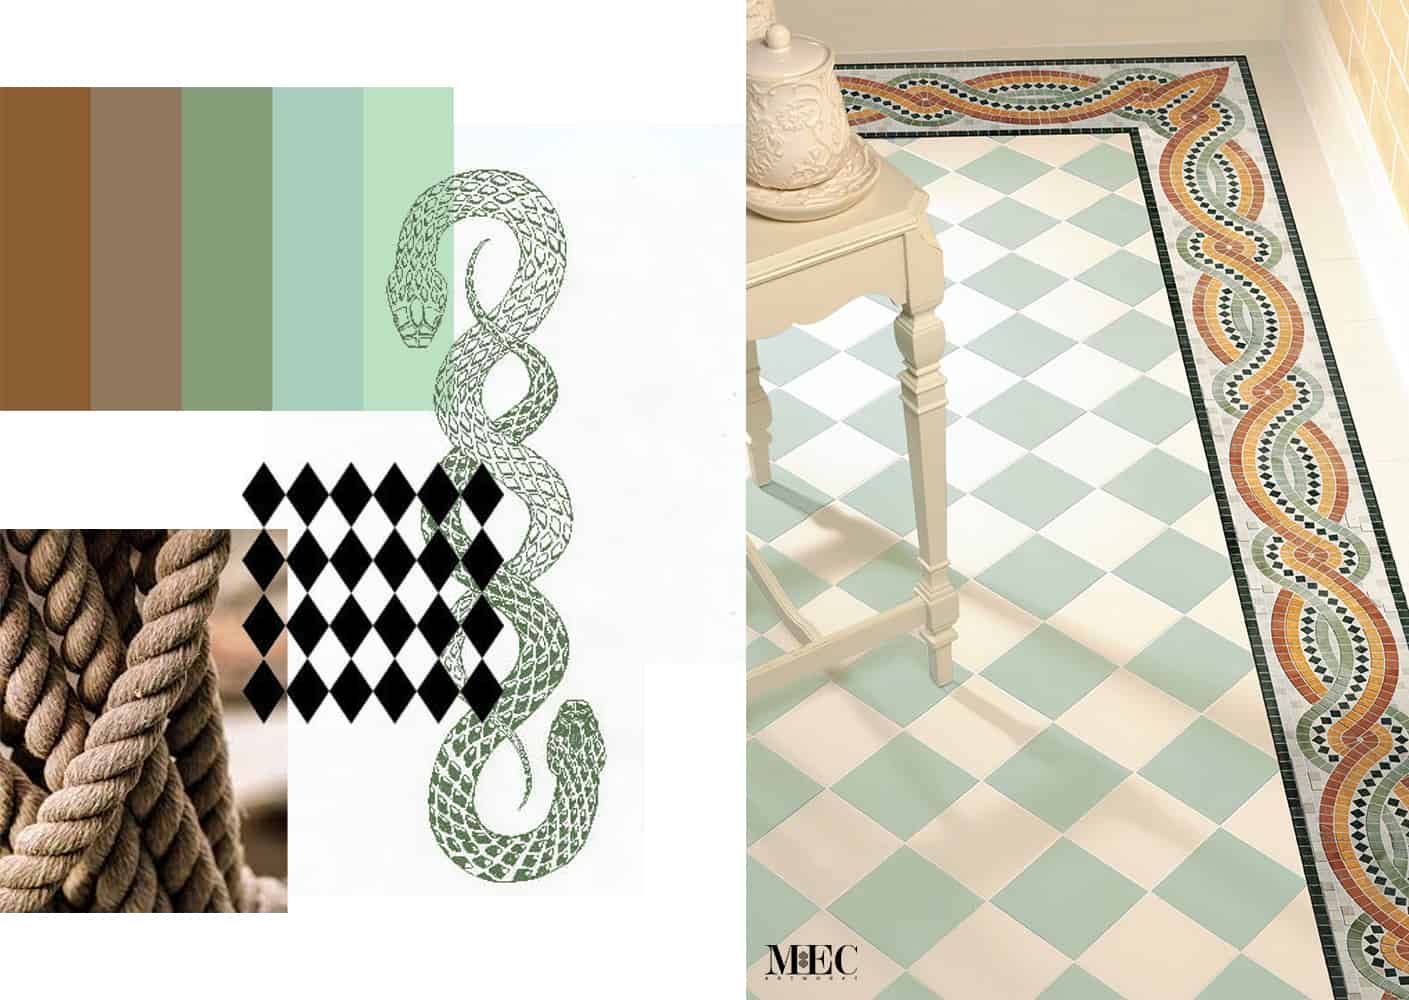 Corda Mosaic Tile Border Ideas - a Greek scroll border handcrafted in vibrant natural marble mosaic colors by MEC